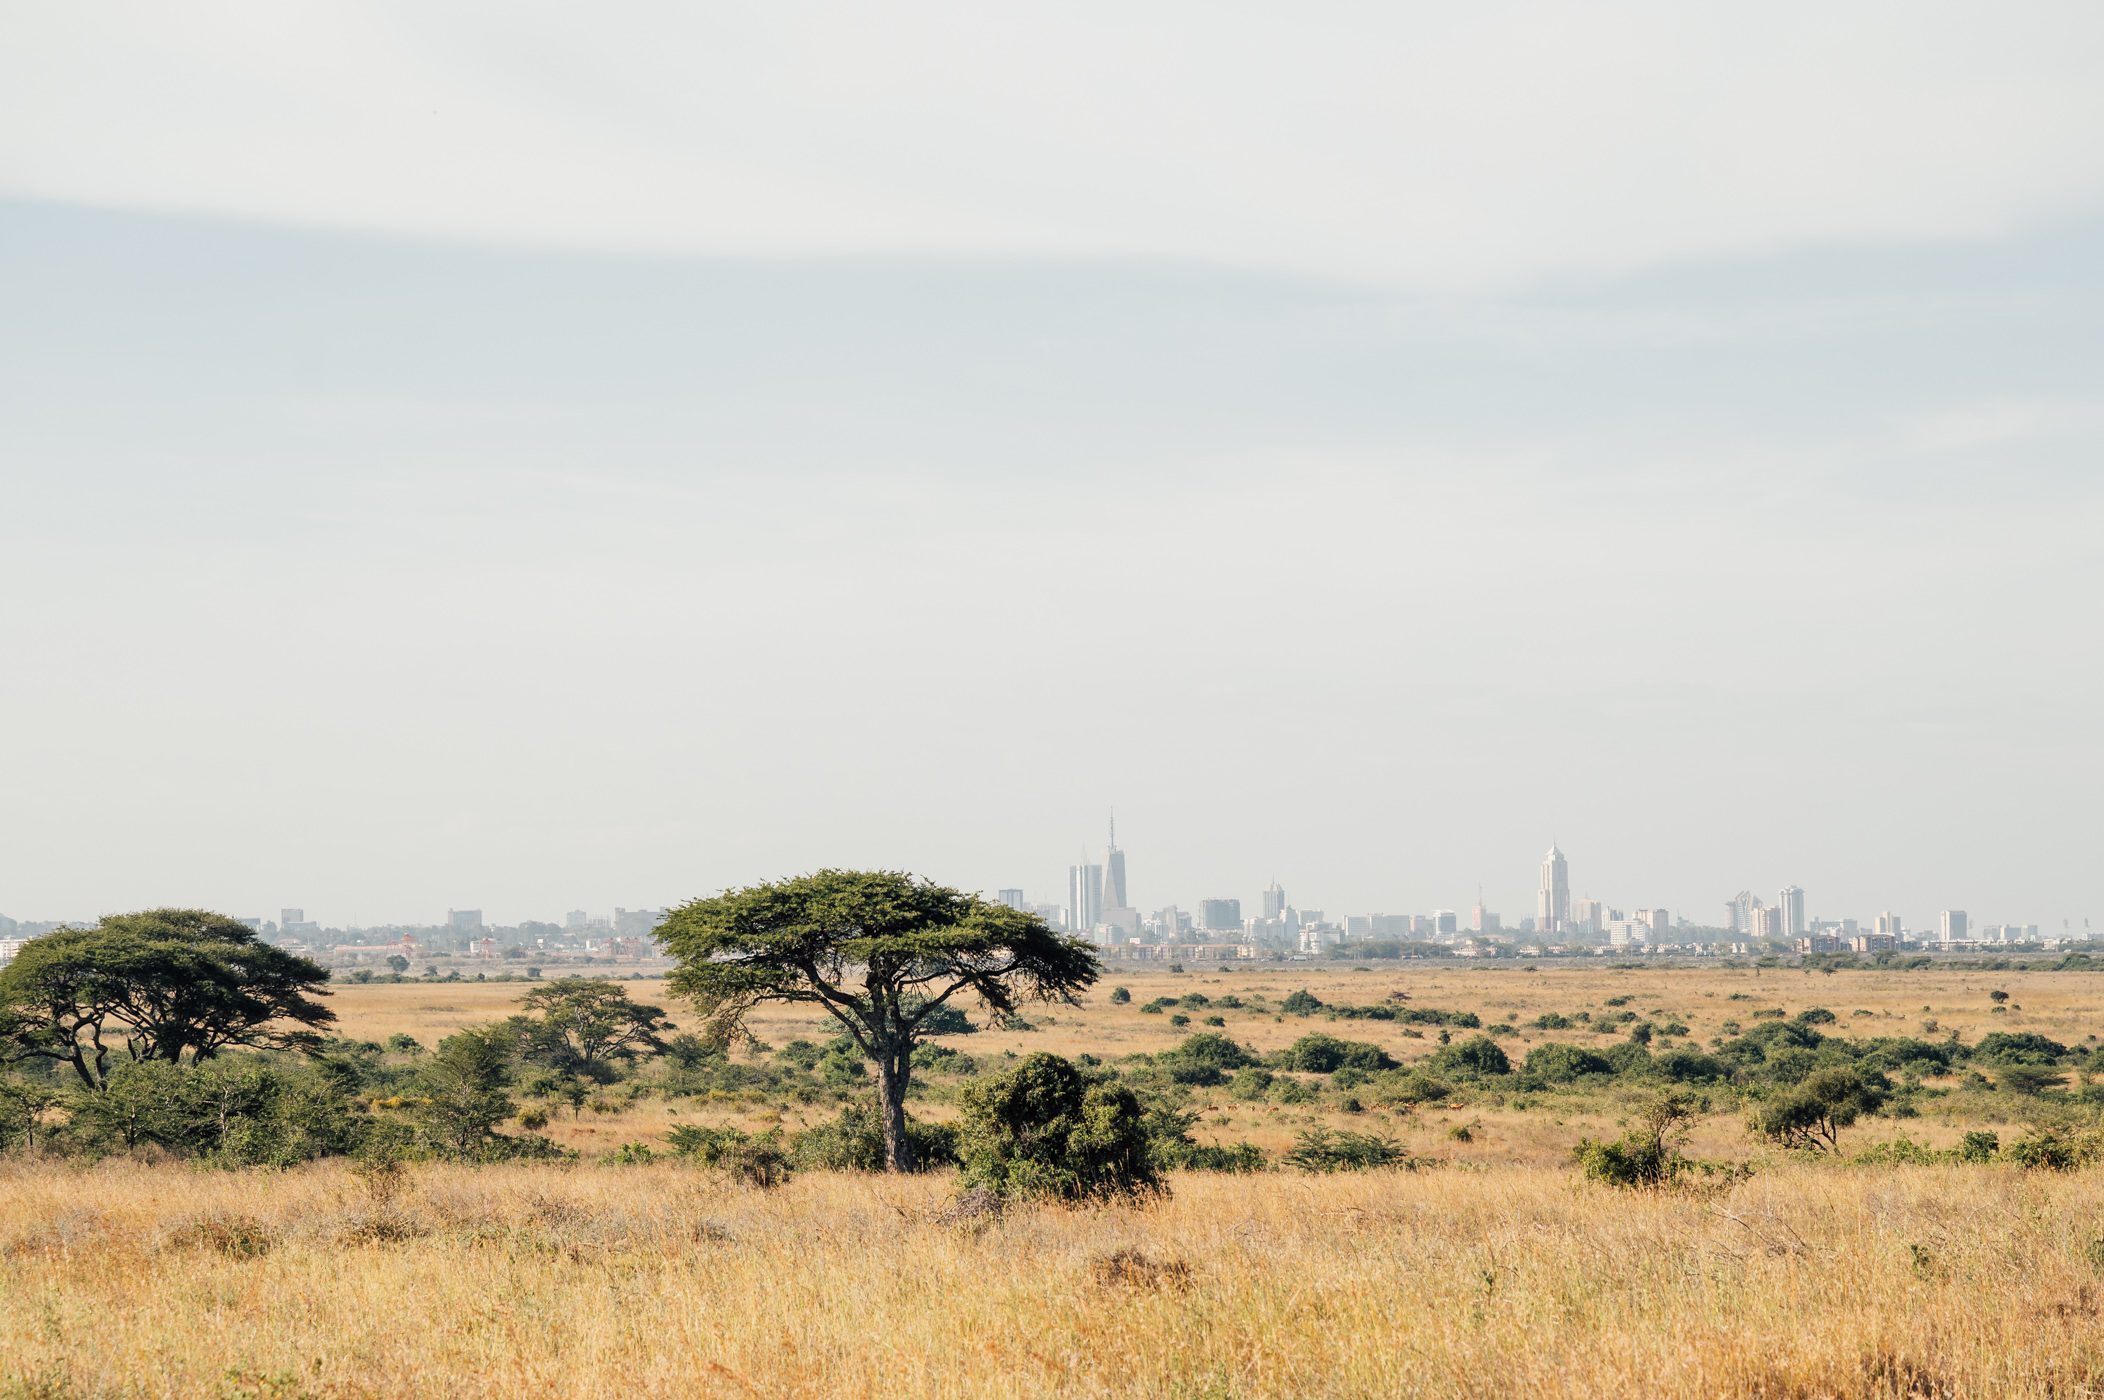 Nairobi National Park - home to Nairobi Tented Camp, the only camp inside the national Park in Kenya's capitol